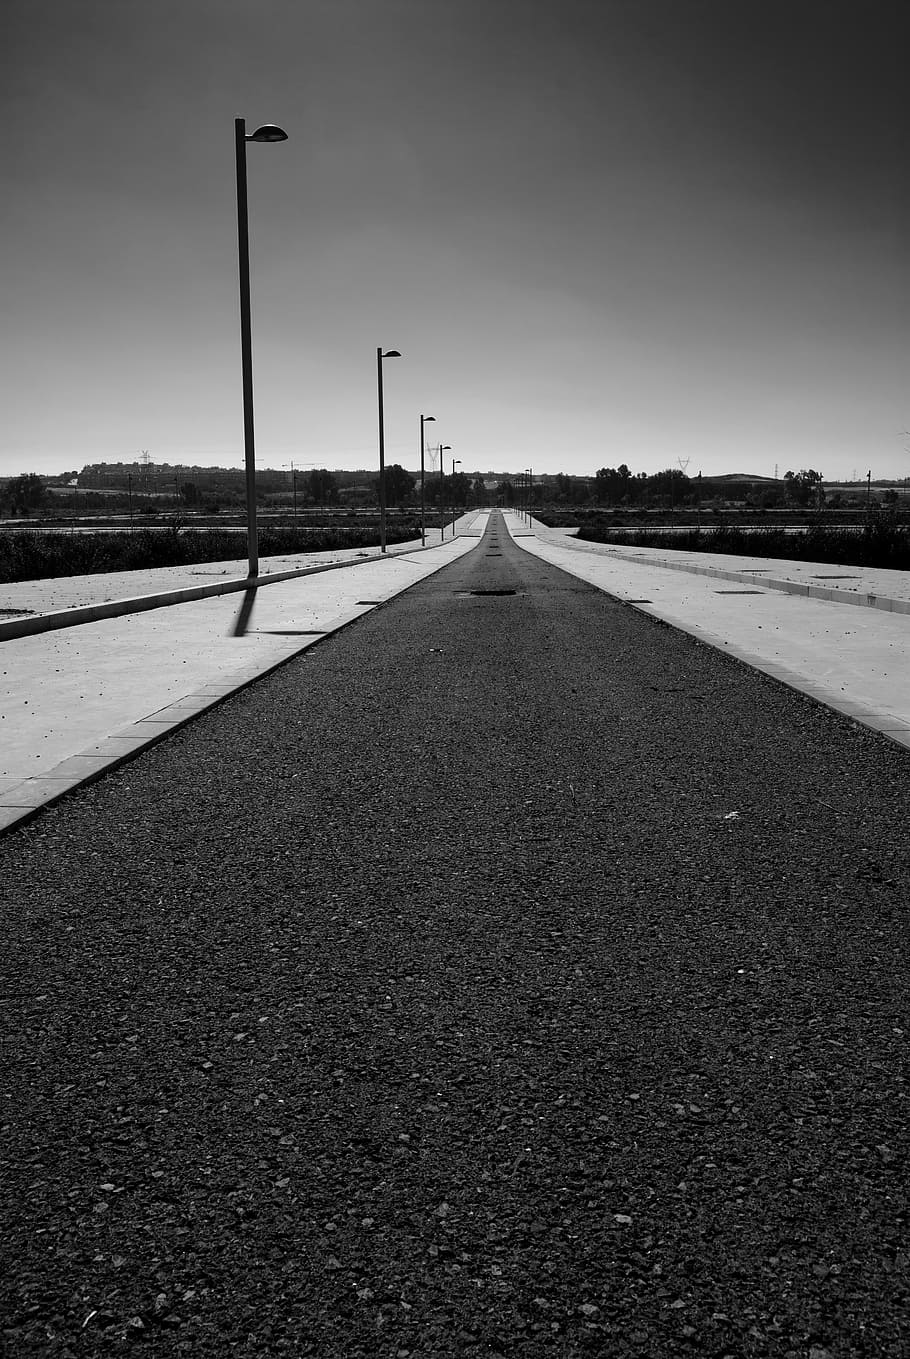 road, soledad, path, crisis, unemployment, investments, crack, ruin, sky, the way forward